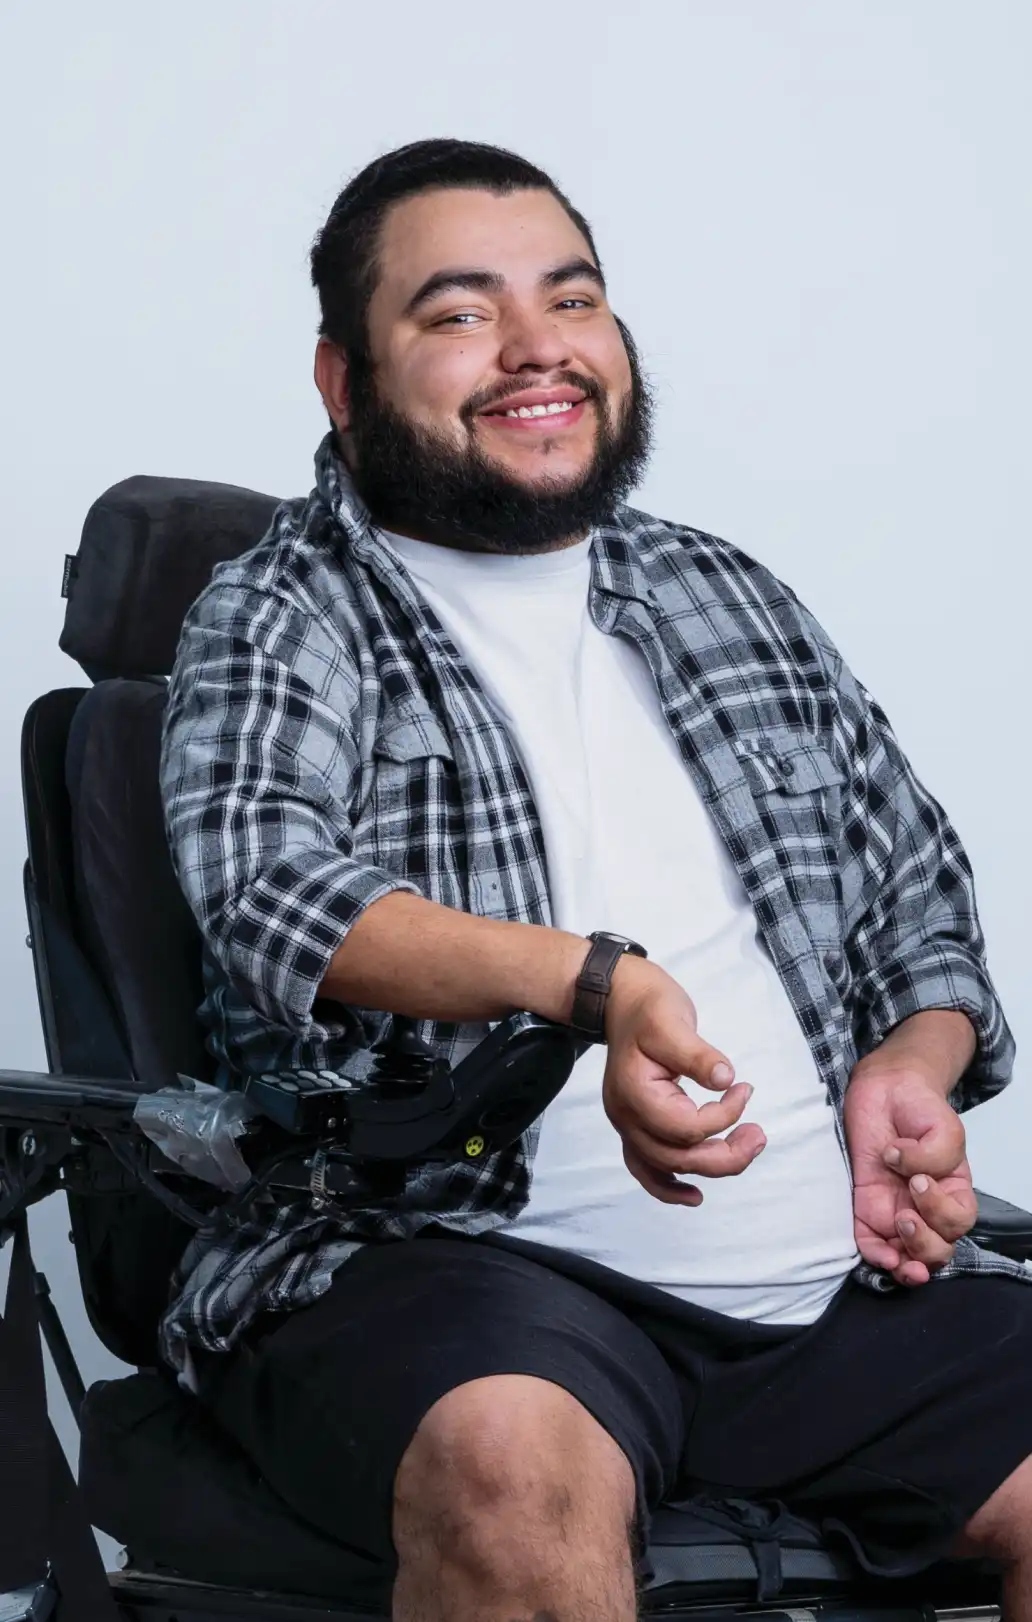 Young man in a motorized wheelchair with a beard and flannel shirt